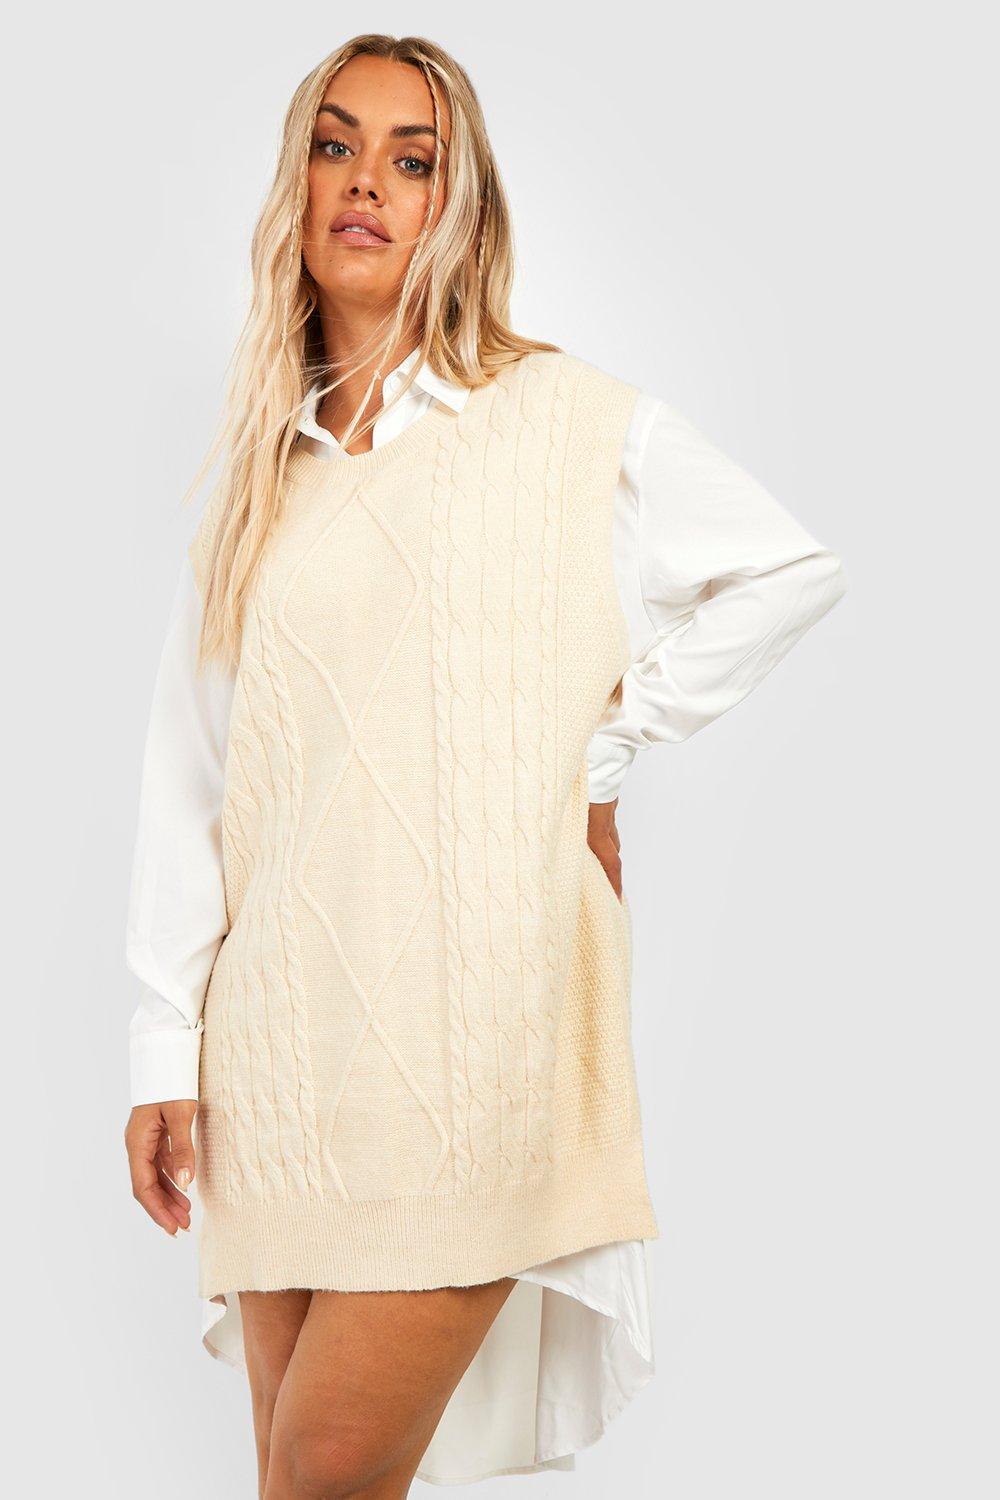 Plus Knitted Vest 2 In 1 Shirt Dress